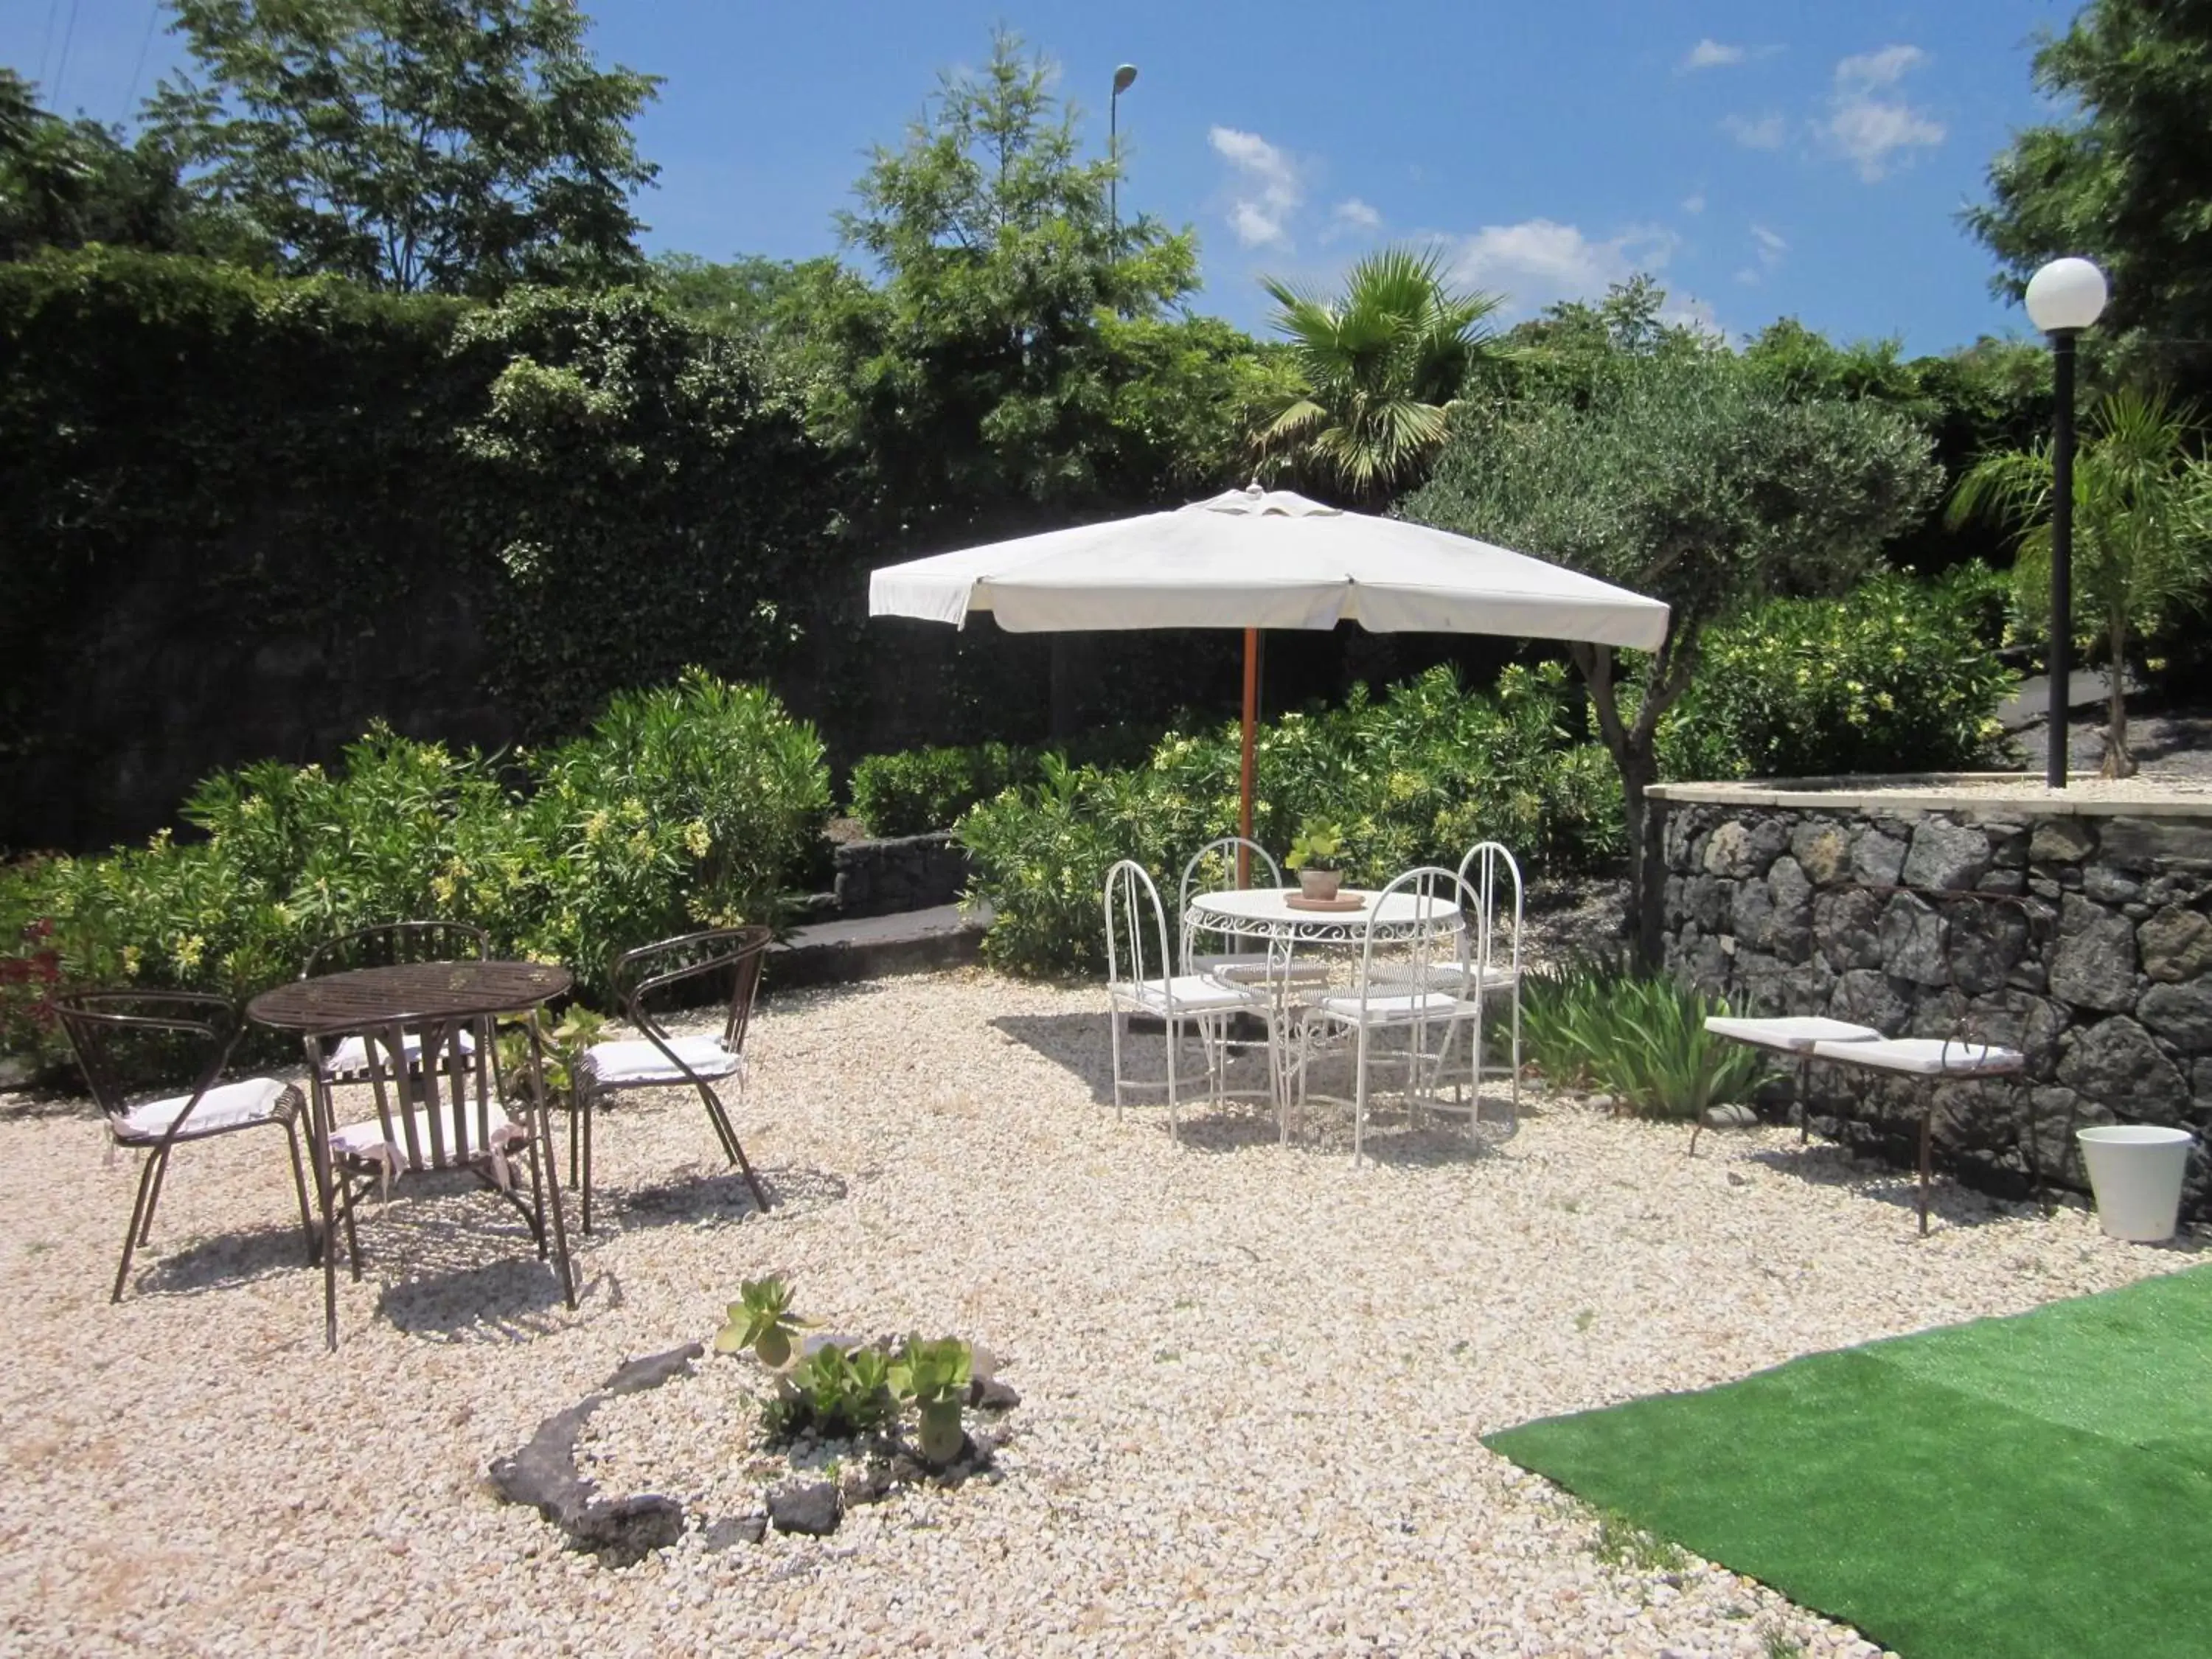 Day in B&B BOUTIQUE DI CHARME "ETNA-RELAX-NATURA"